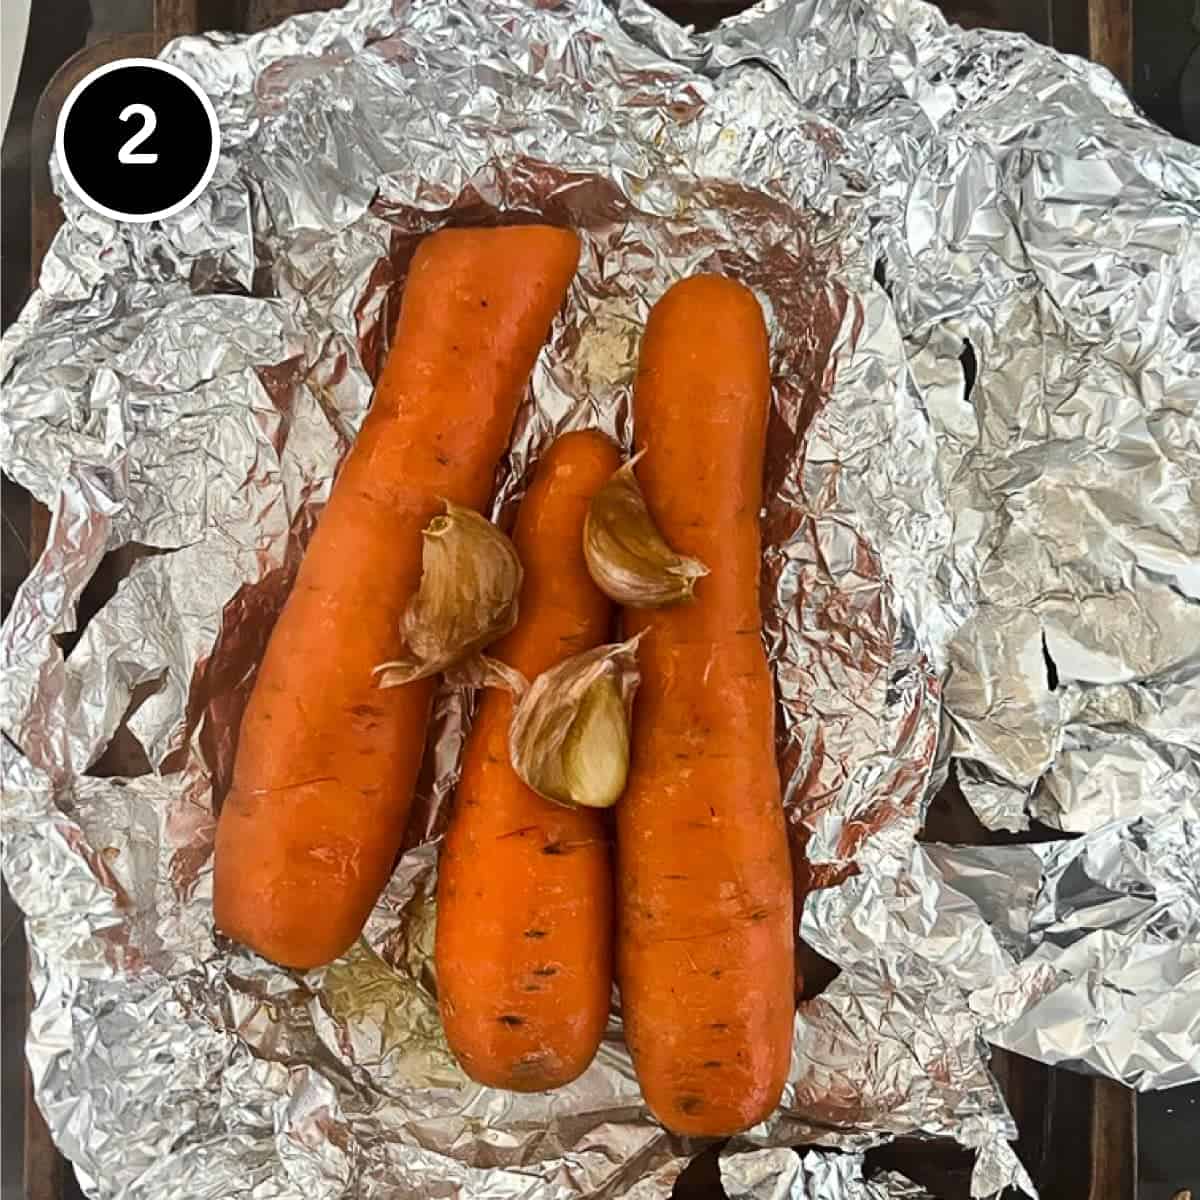 Roasted carrots and garlic in foil